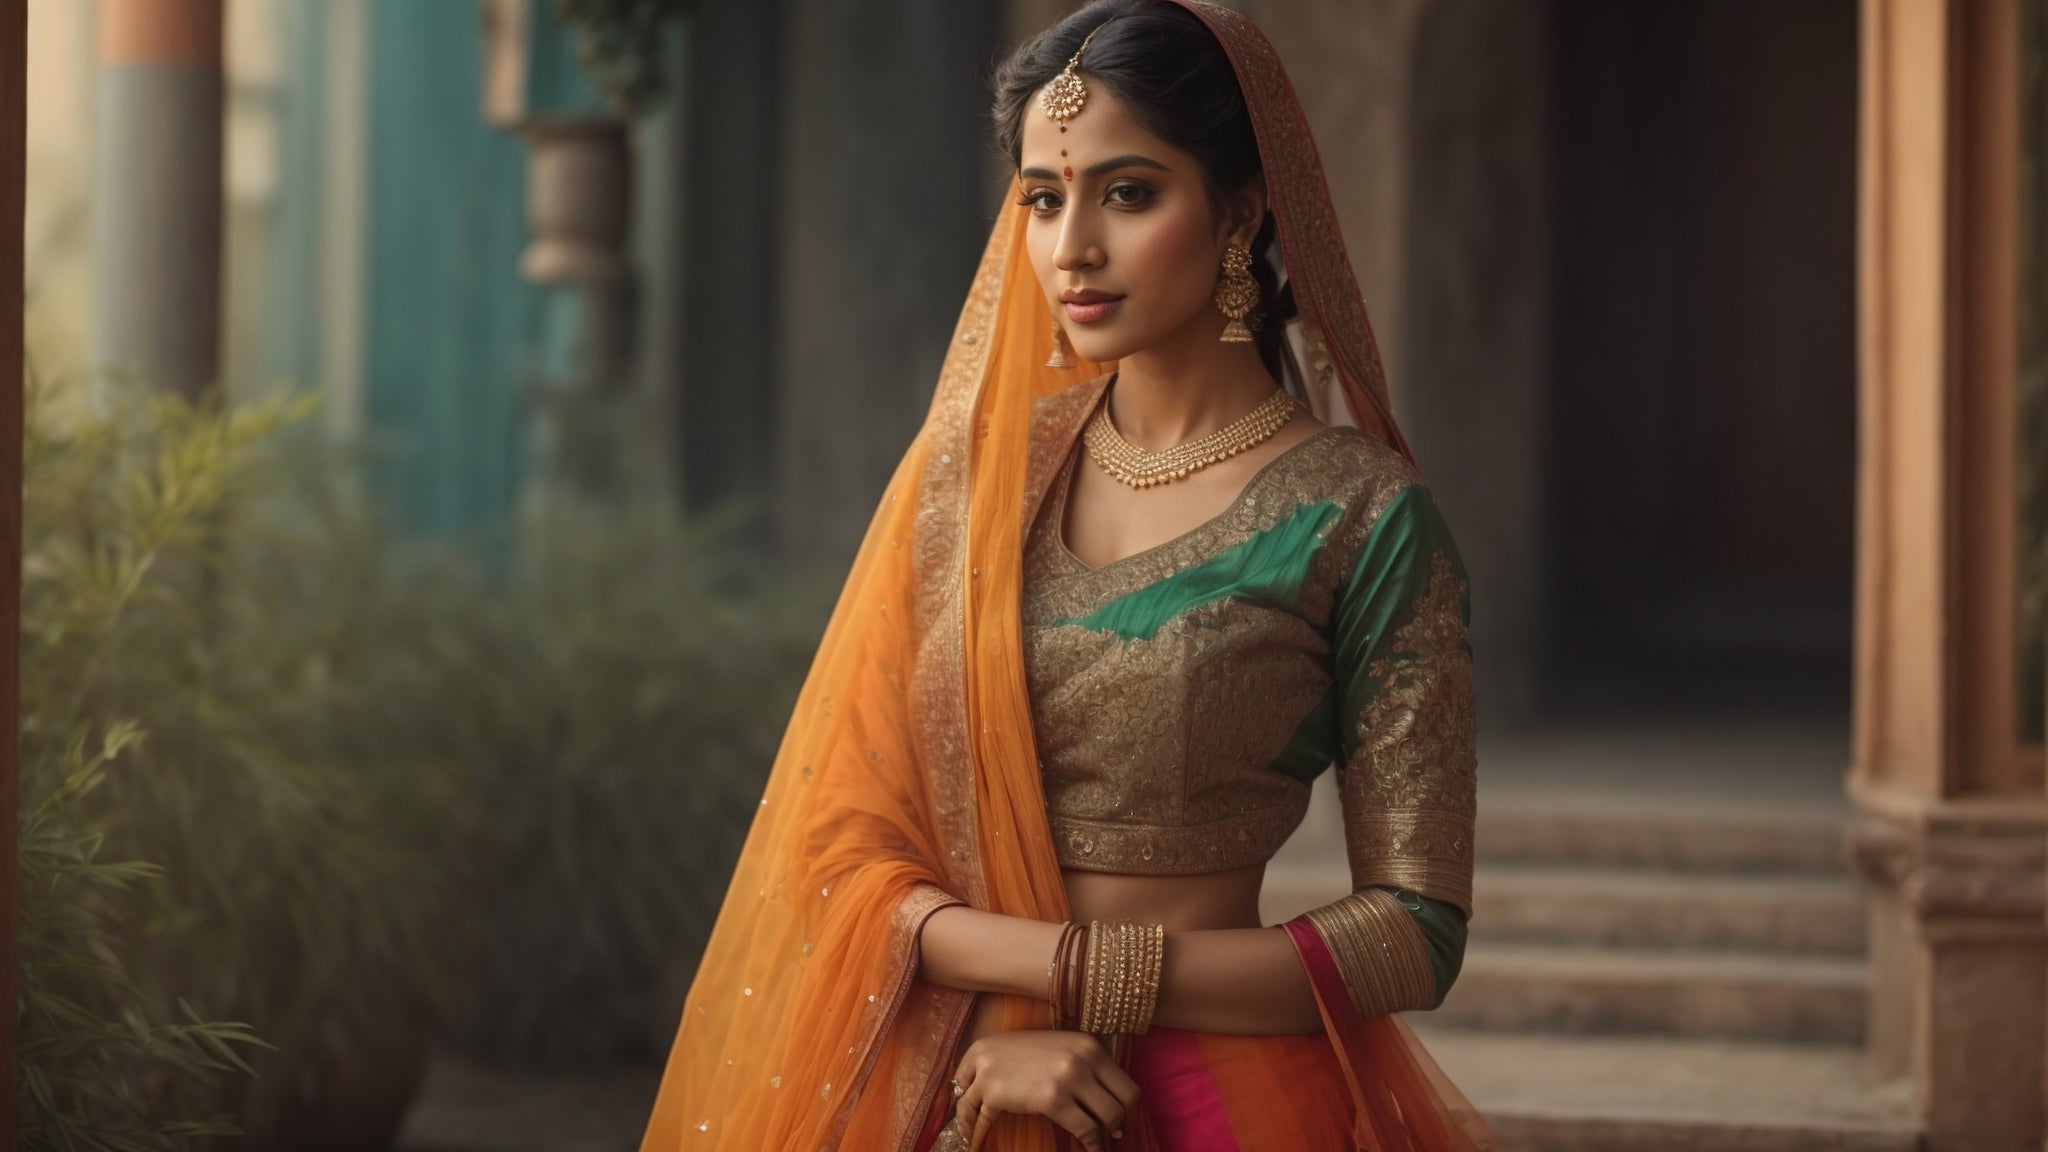 The Art of Layering: How to Style Dupattas with Your Lehenga